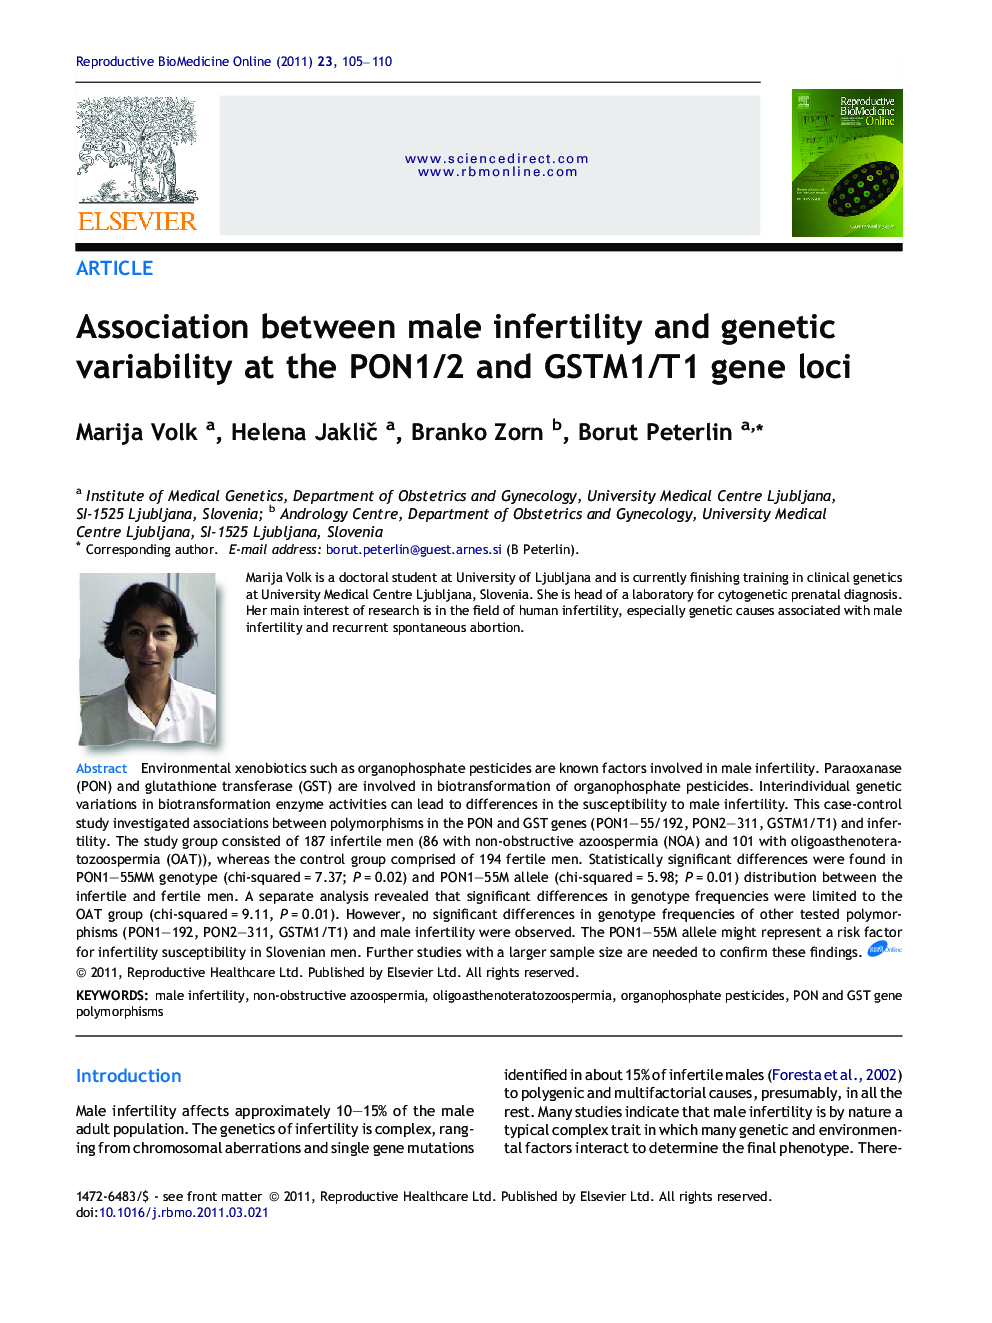 Association between male infertility and genetic variability at the PON1/2 and GSTM1/T1 gene loci 